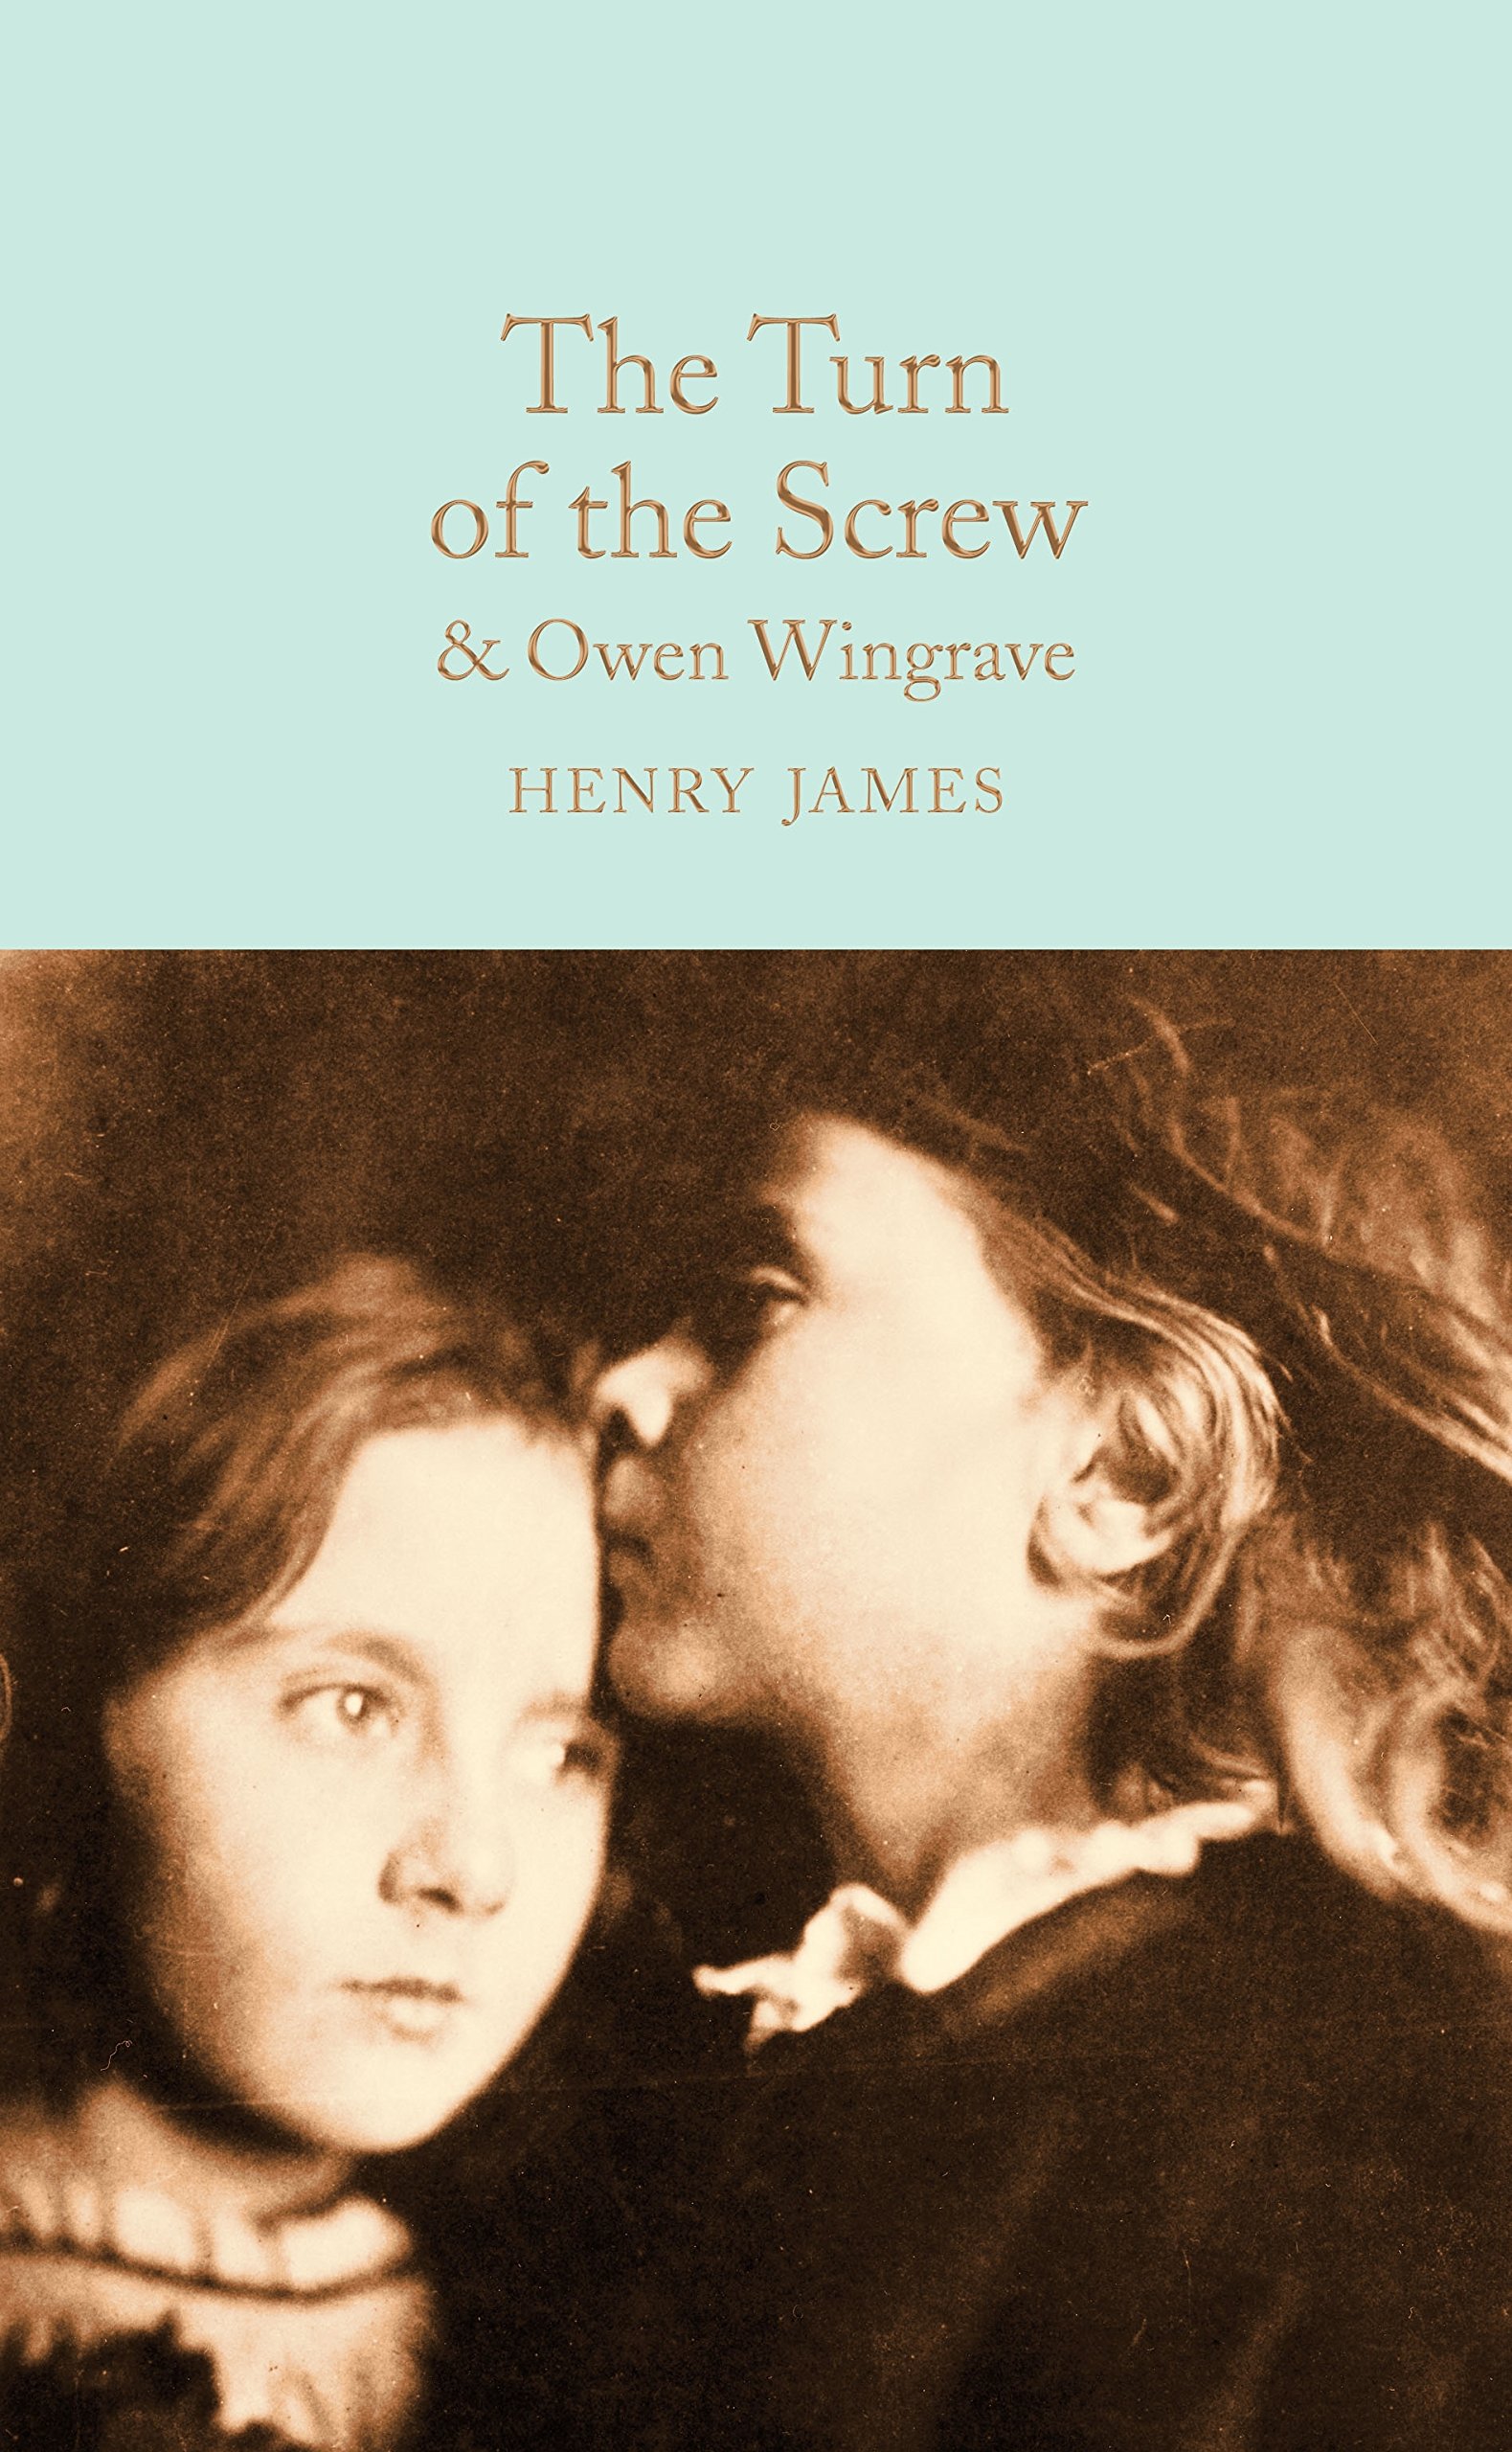 The Turn of the Screw and Owen Wingrave | Henry James image0